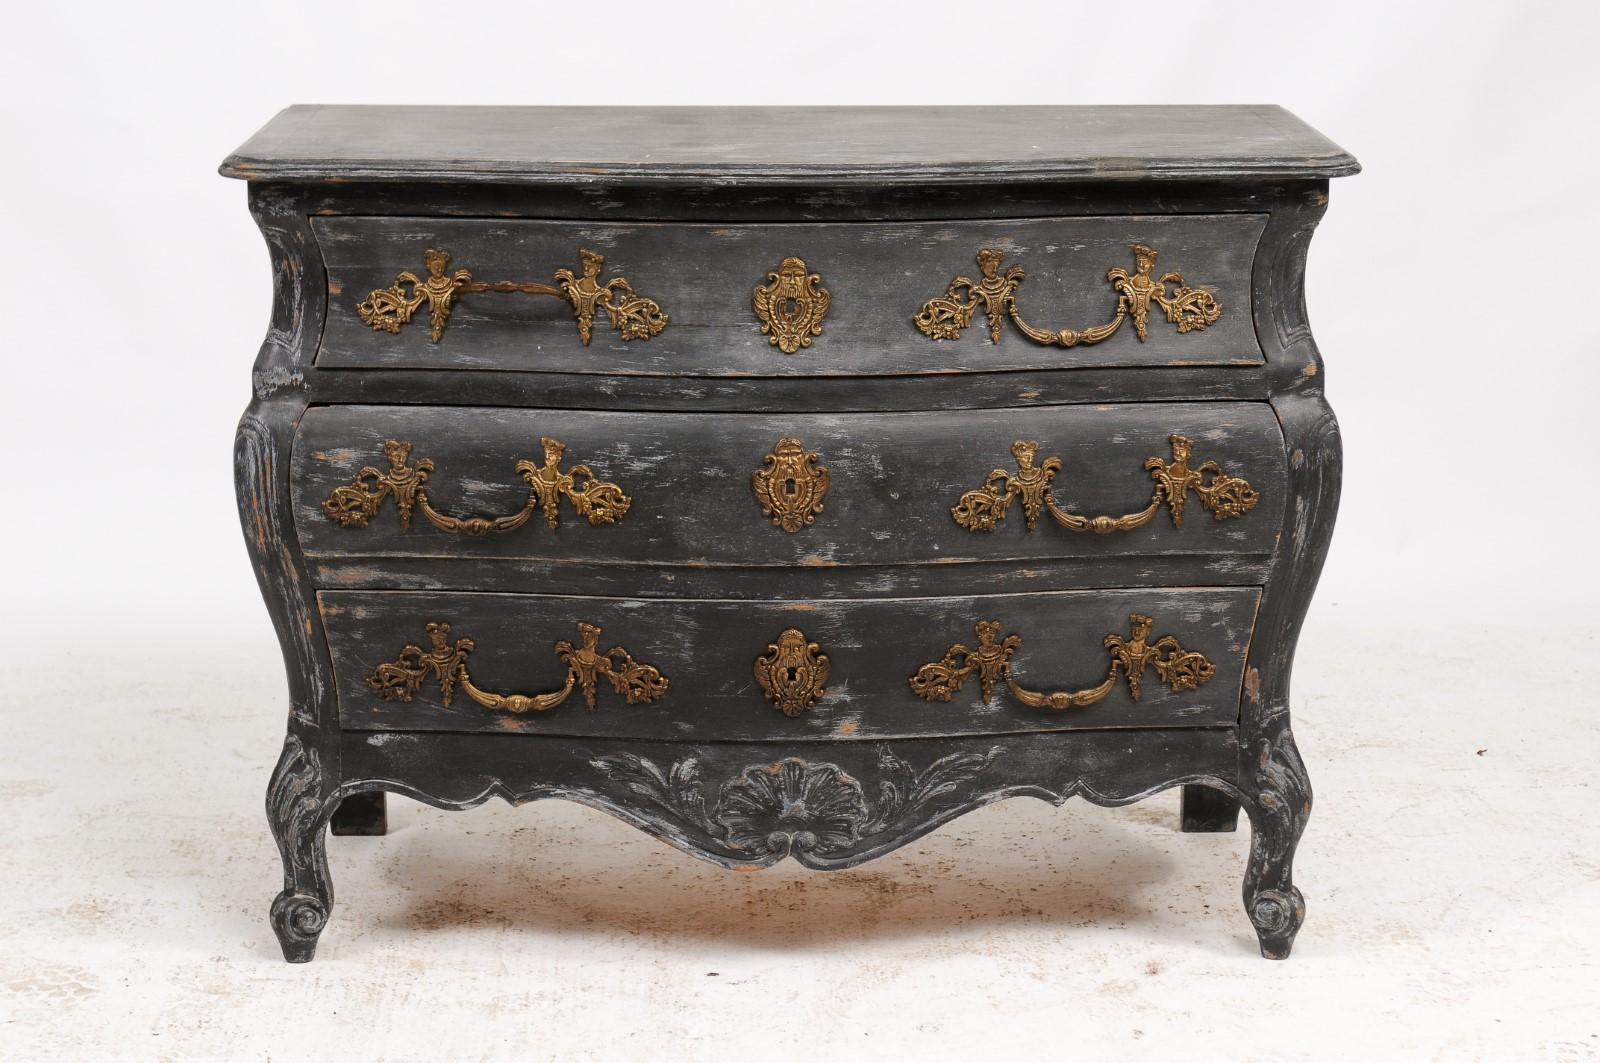 A French Louis XV style bombé three-drawer commode from the late 19th century, repainted in black, with Rococo style hardware, carved scalloped skirt and scrolled feet. This refinished, old, bombé-style commode caught our eye with its matte black